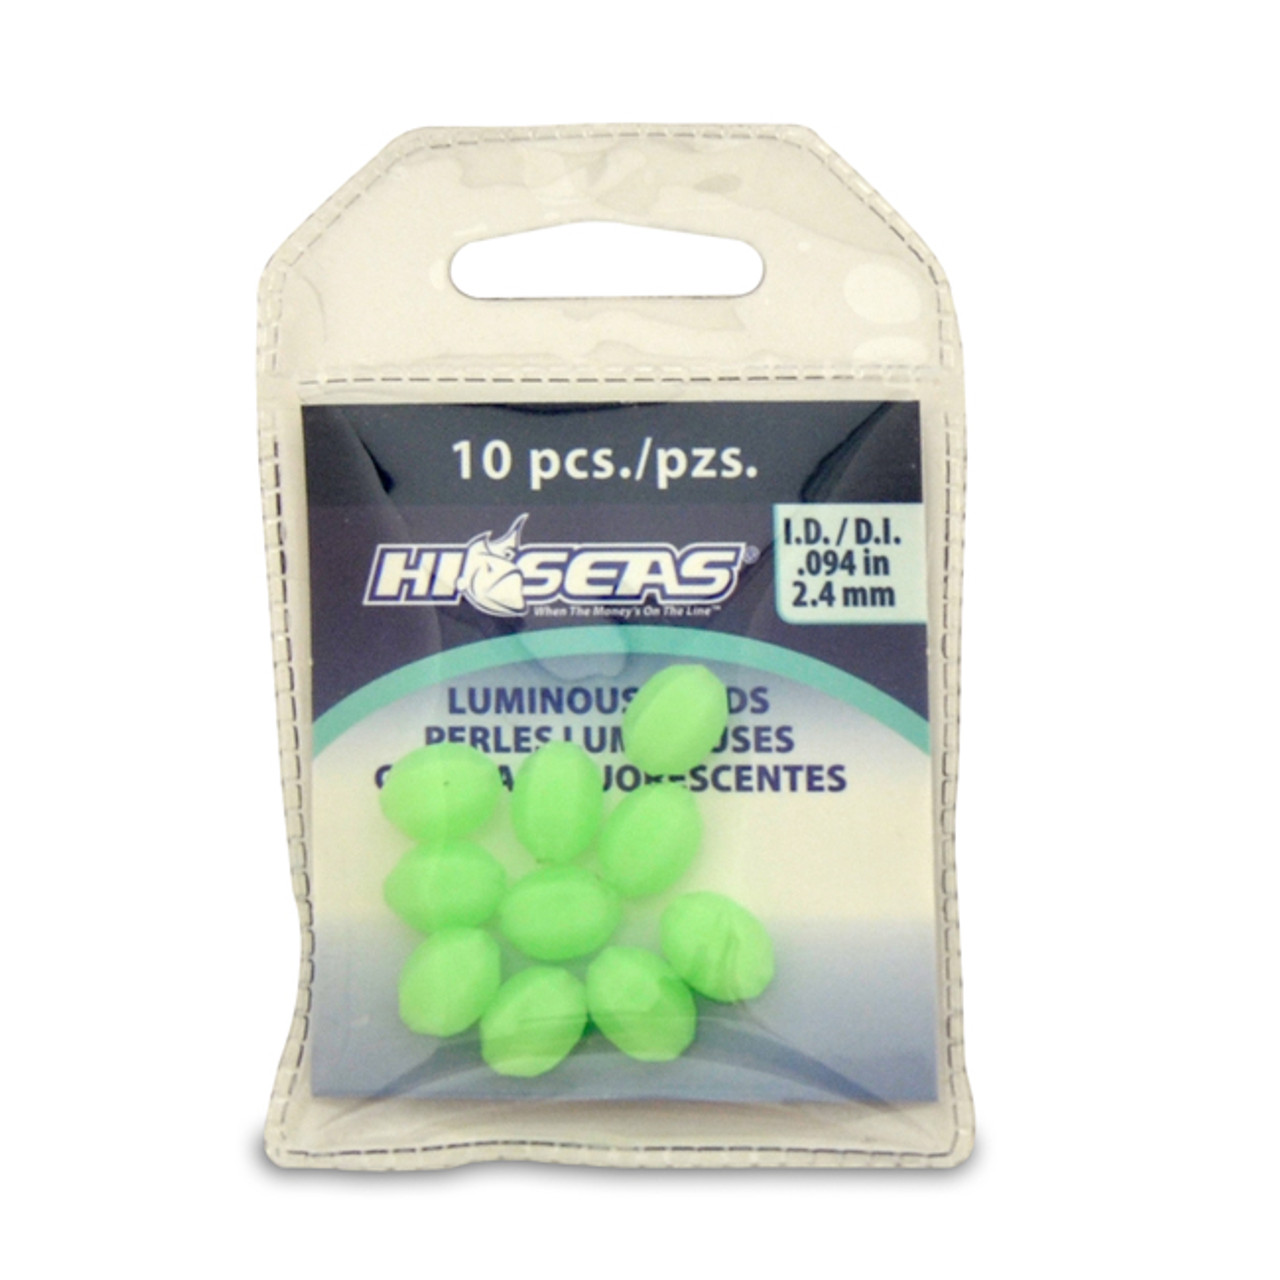 Uxcell 5x3.4mm Oval Plastic Luminous Glow Fishing Beads Tackle